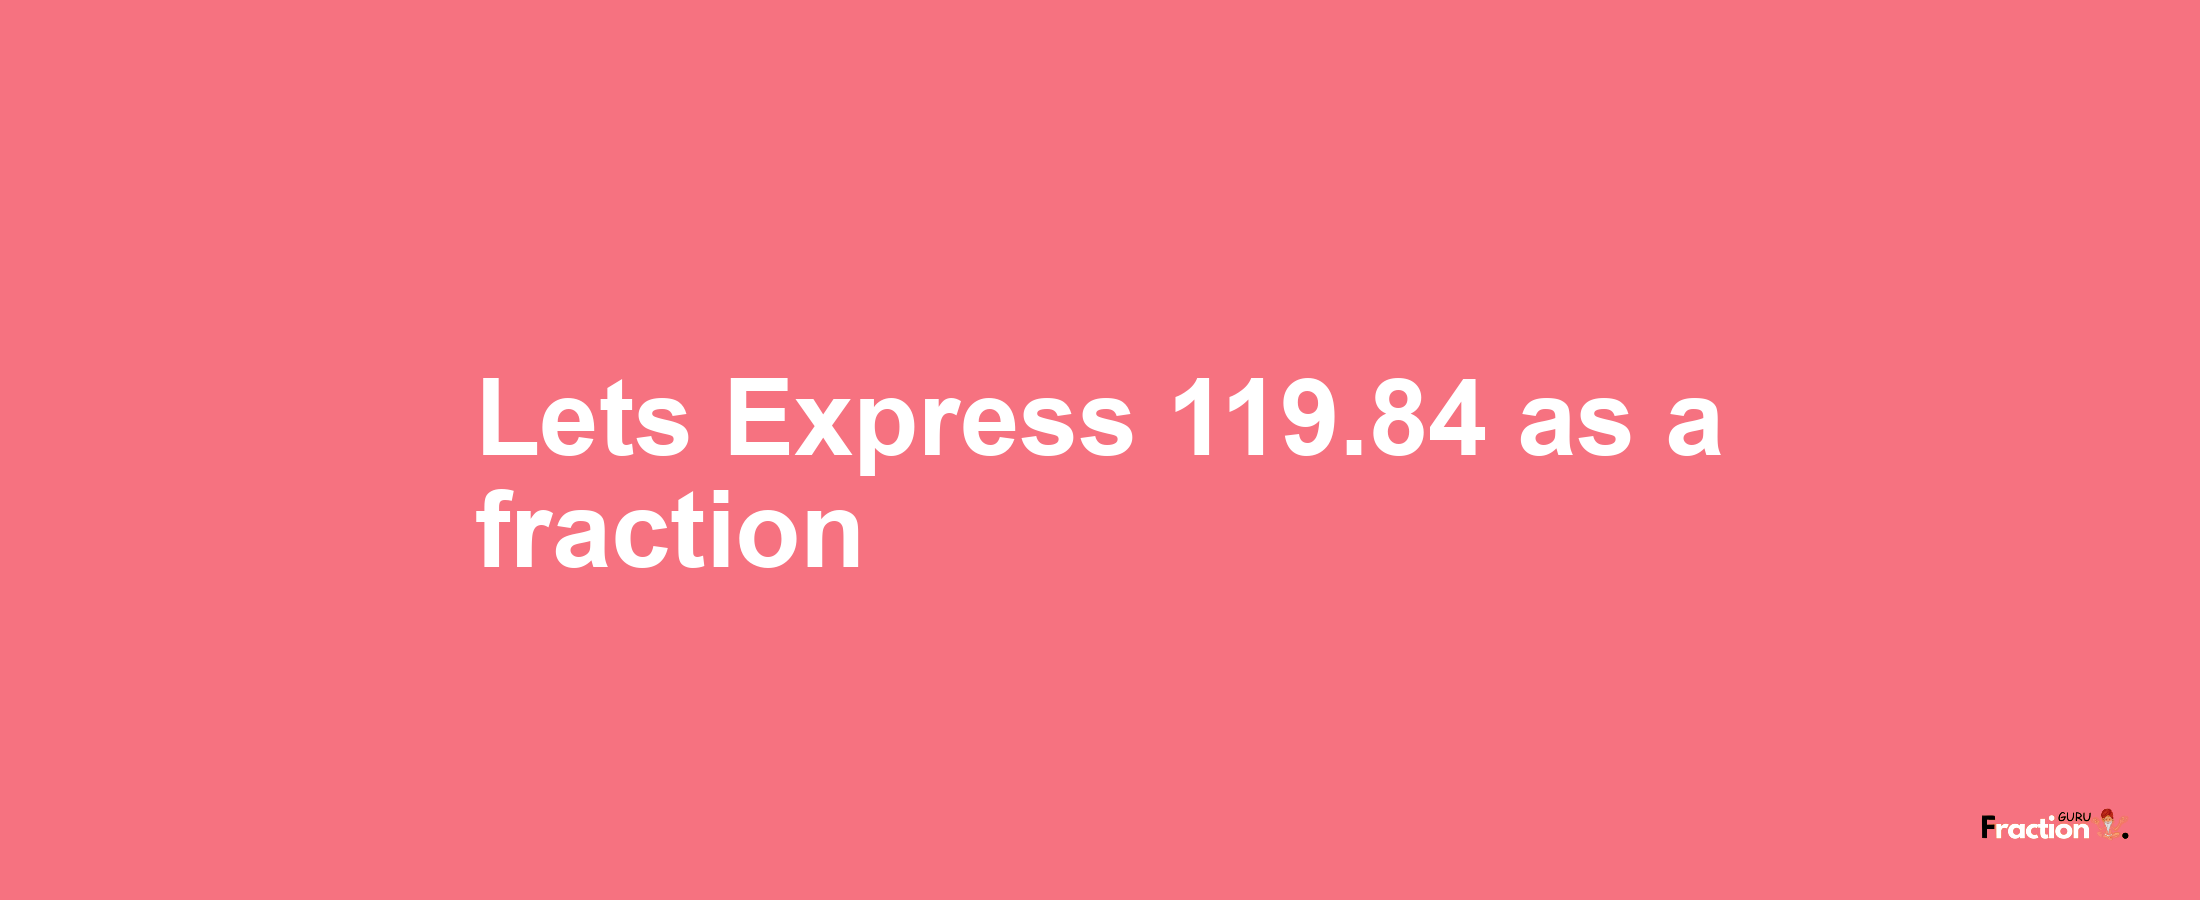 Lets Express 119.84 as afraction